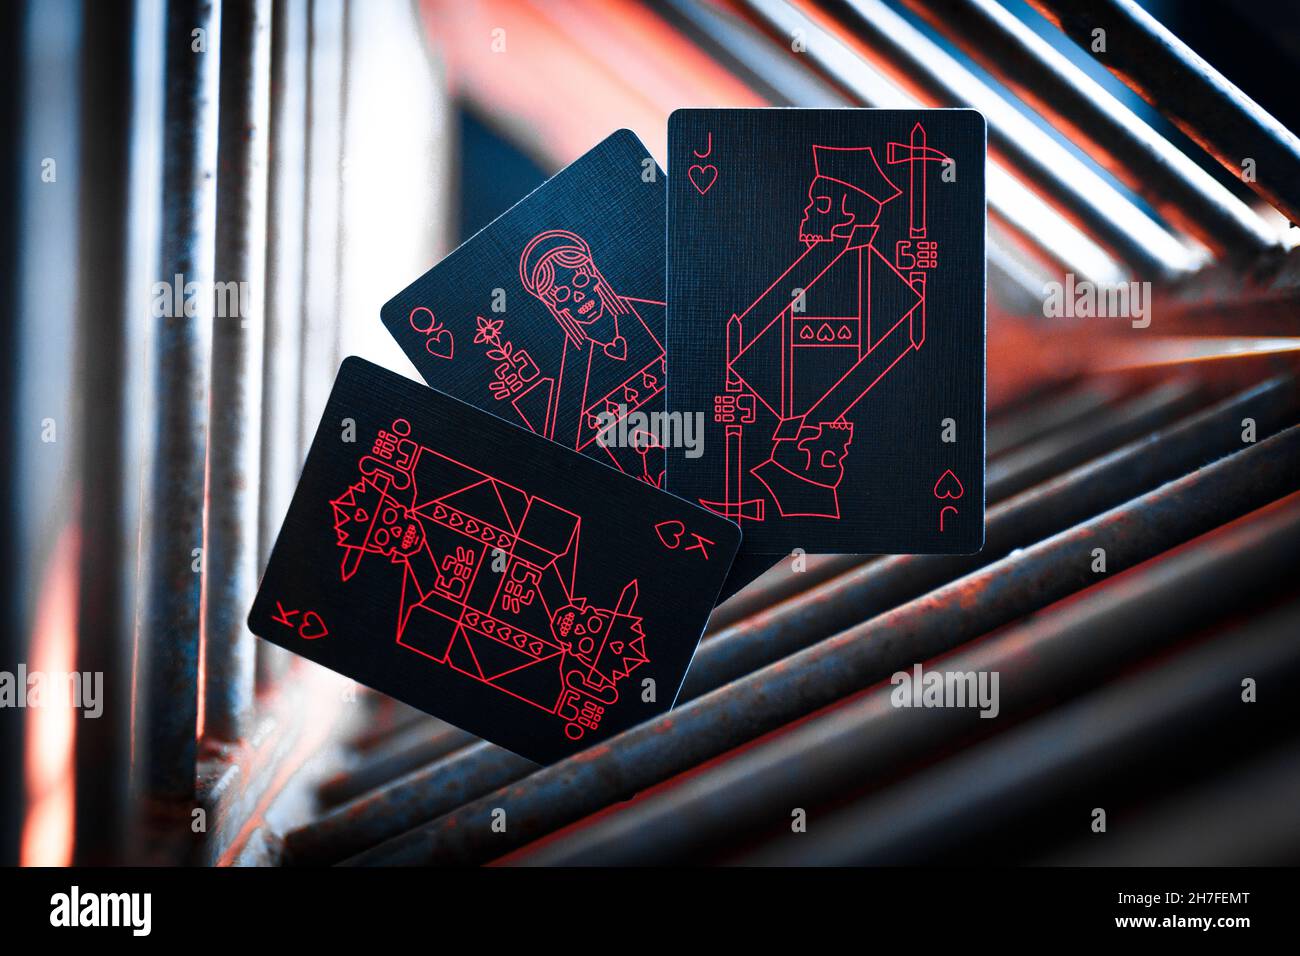 Closeup shot of uniquely designed playing cards Stock Photo